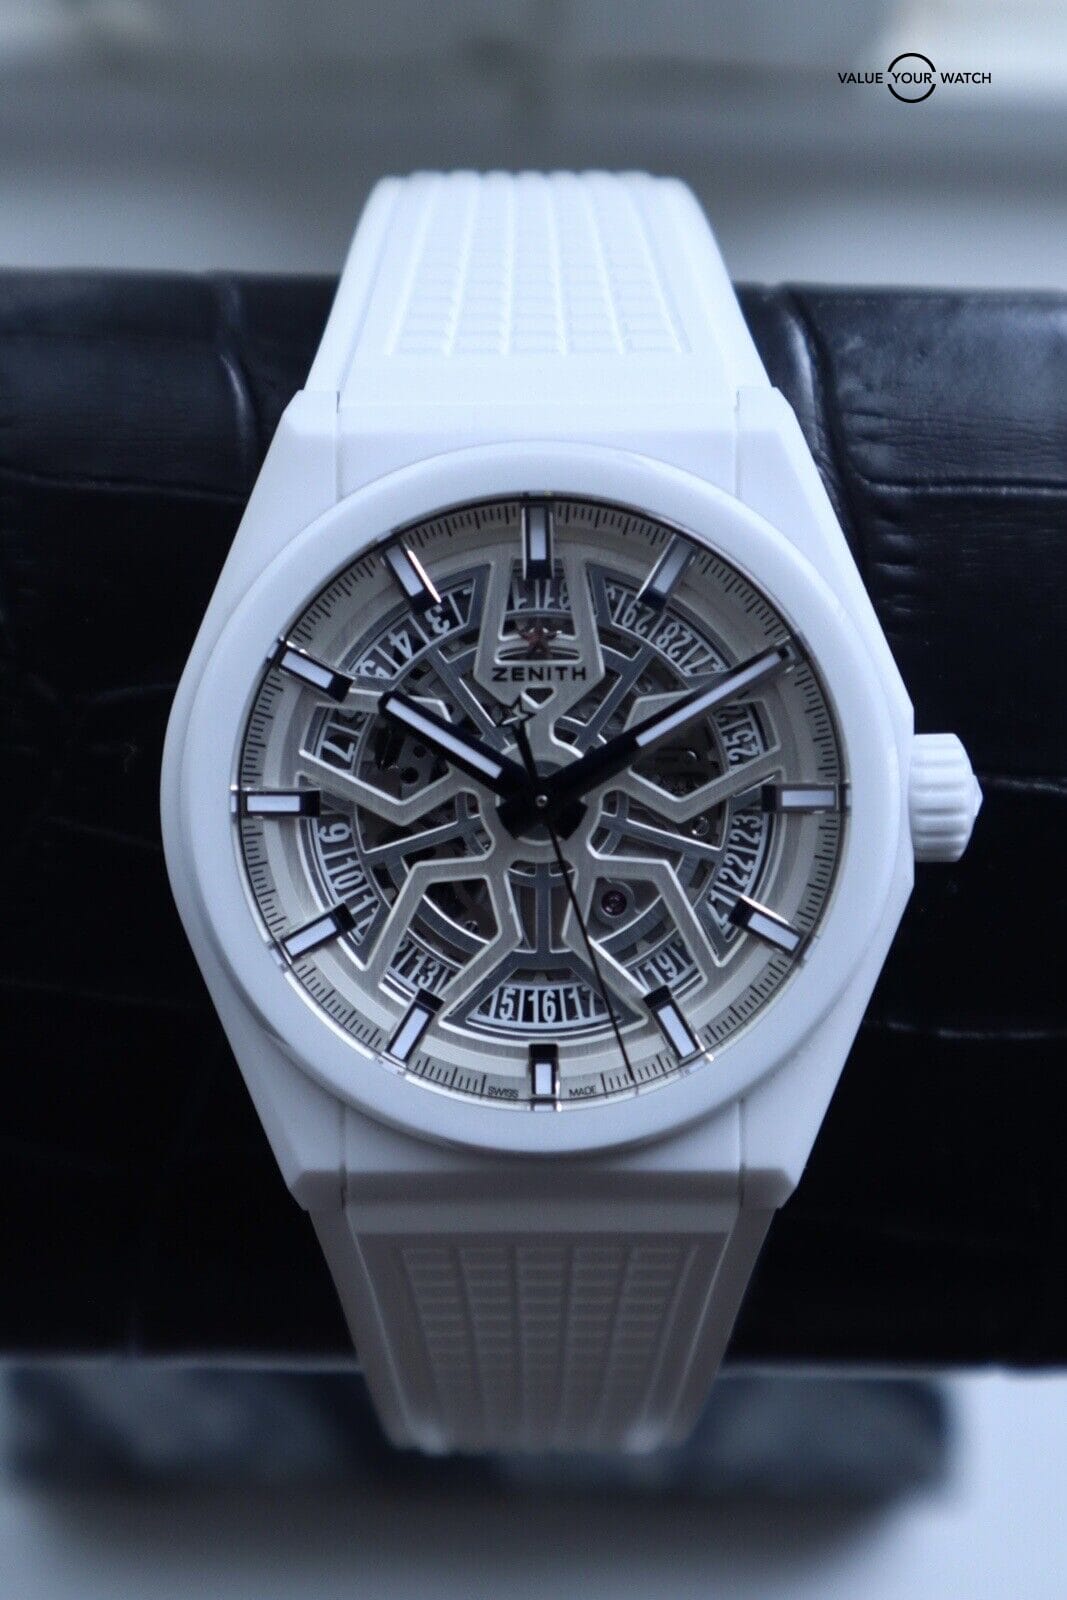 Authentic Used Zenith Defy Classic White Ceramic 49.9002.670 Watch